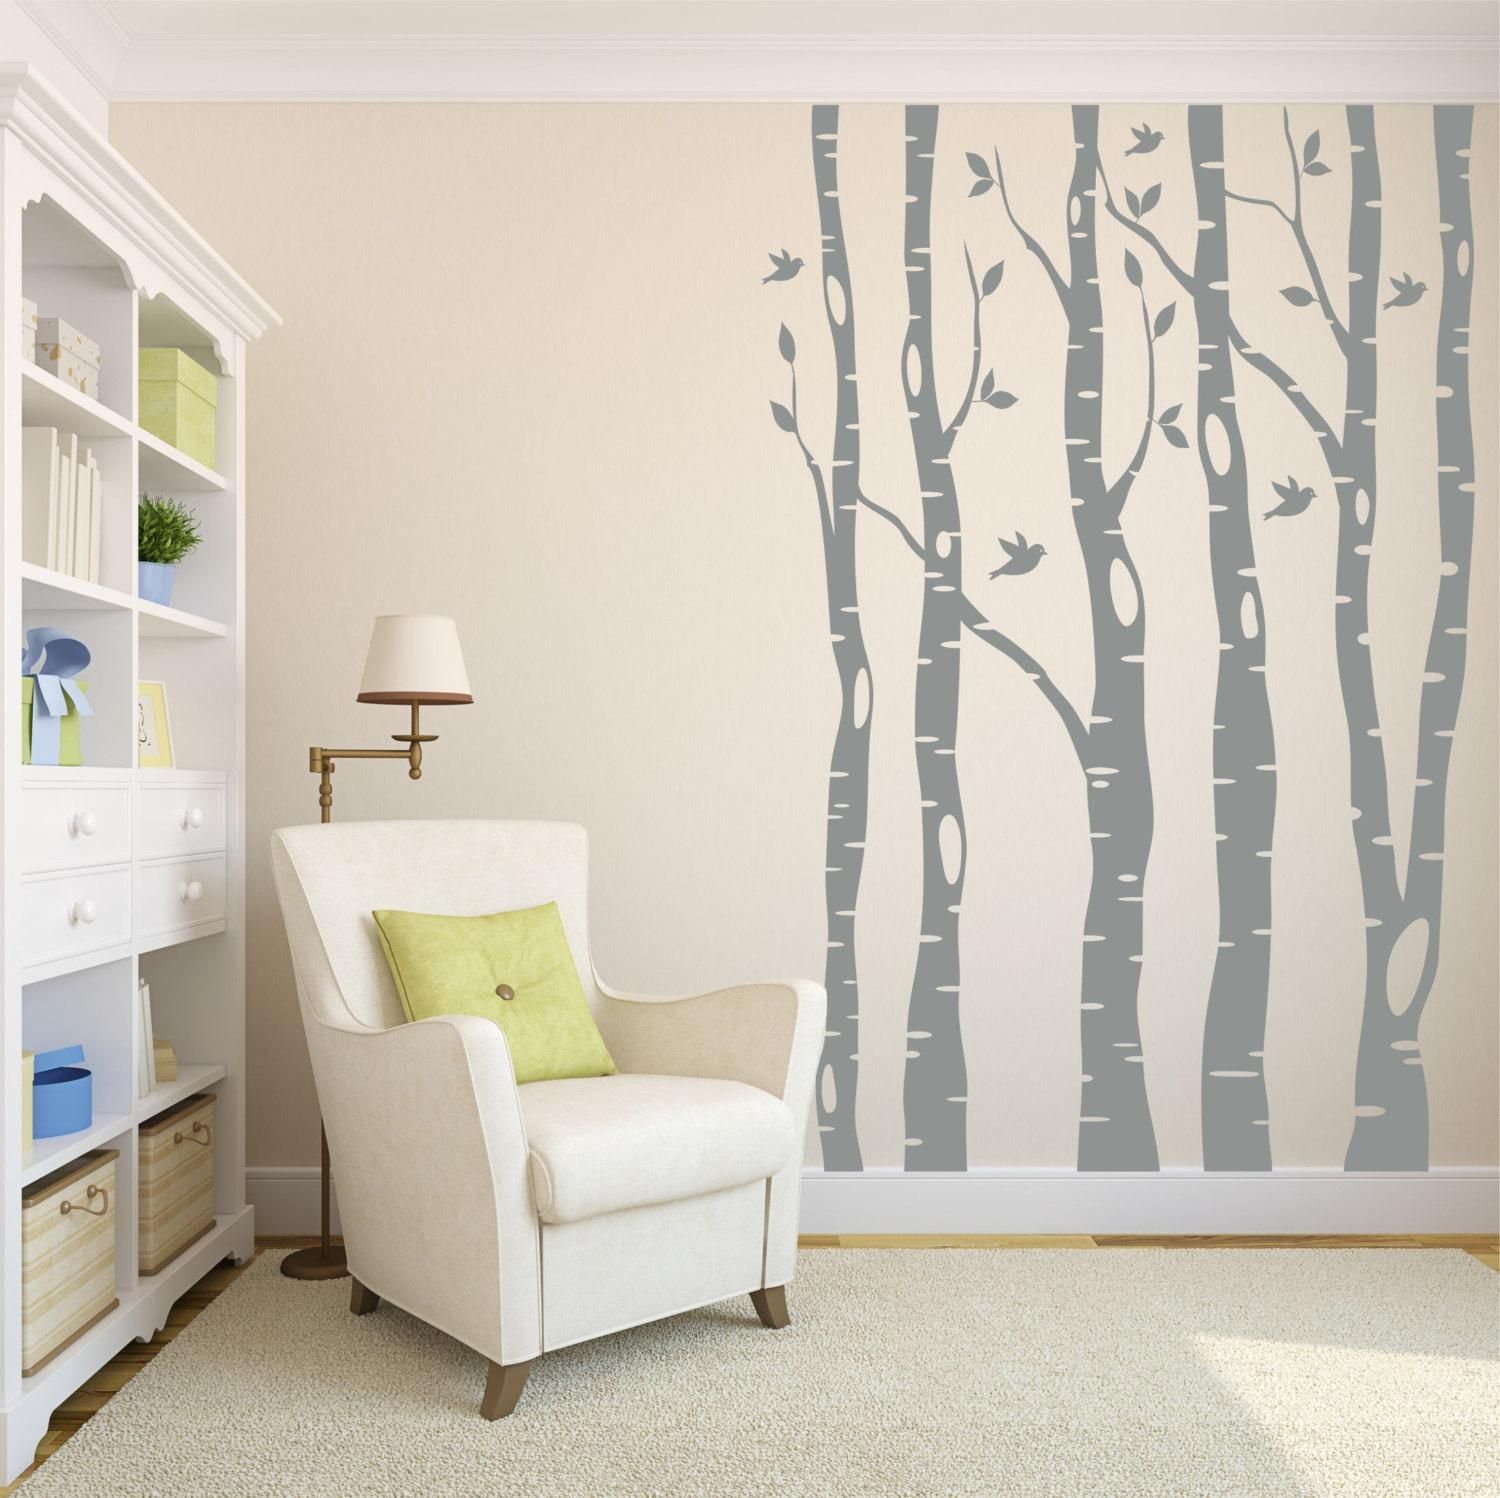 Kids Room. Wall Decal Ideas For Wall Decorations: White Vinyl Wall Pertaining To Oak Tree Vinyl Wall Art (Photo 15 of 20)